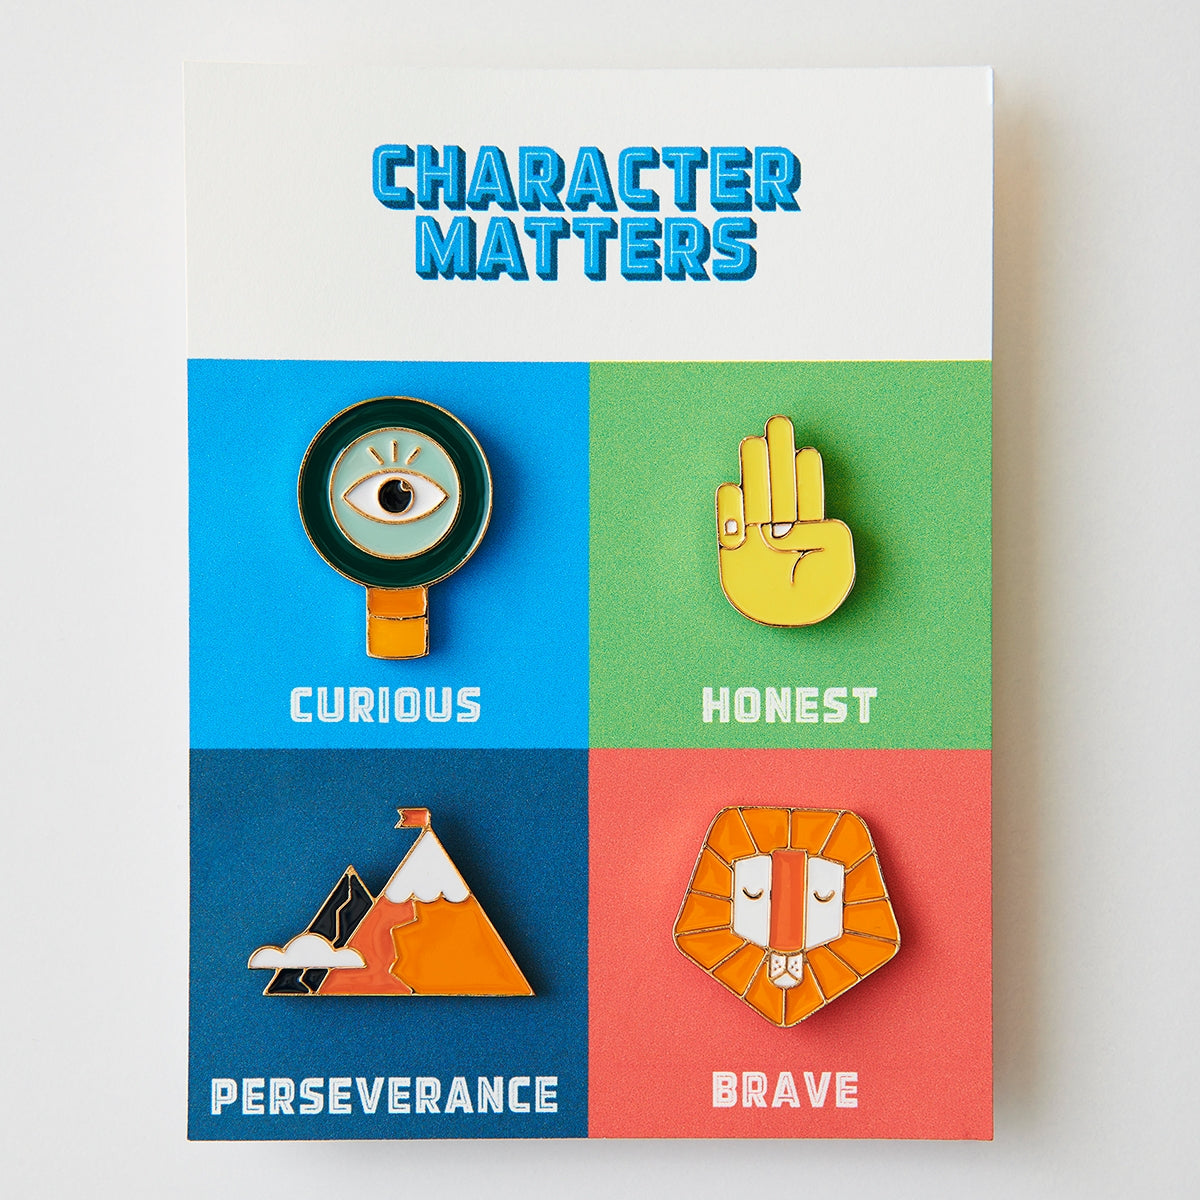 Set of 4 children's character badge enamel pins featuring the traits Curious, Honest, Perseverance, and Brave, perfect for personalizing kids' jackets, bags, or hats.